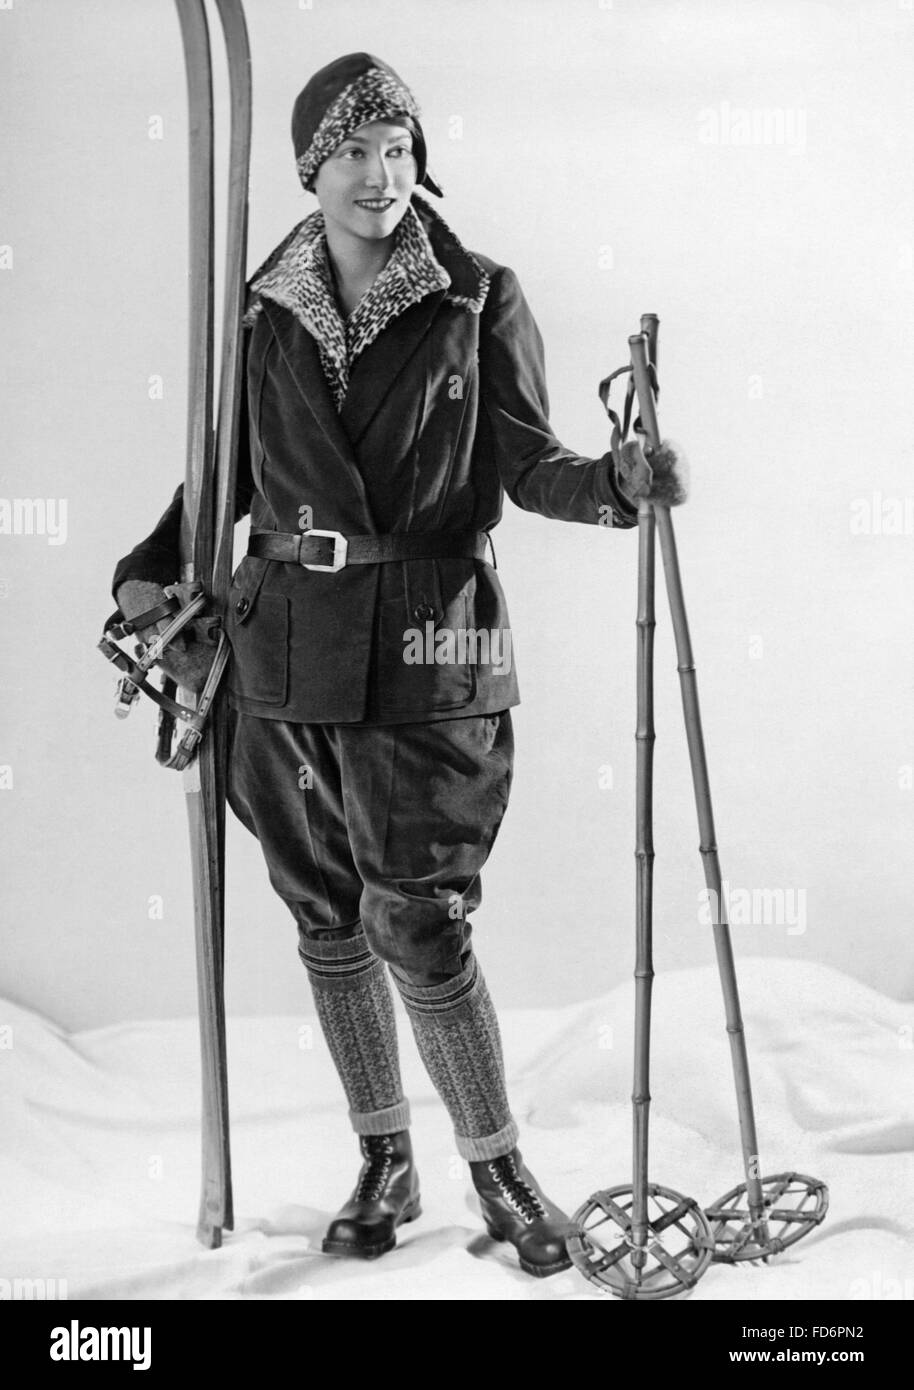 Fashion for female skiers, 1930 Stock Photo